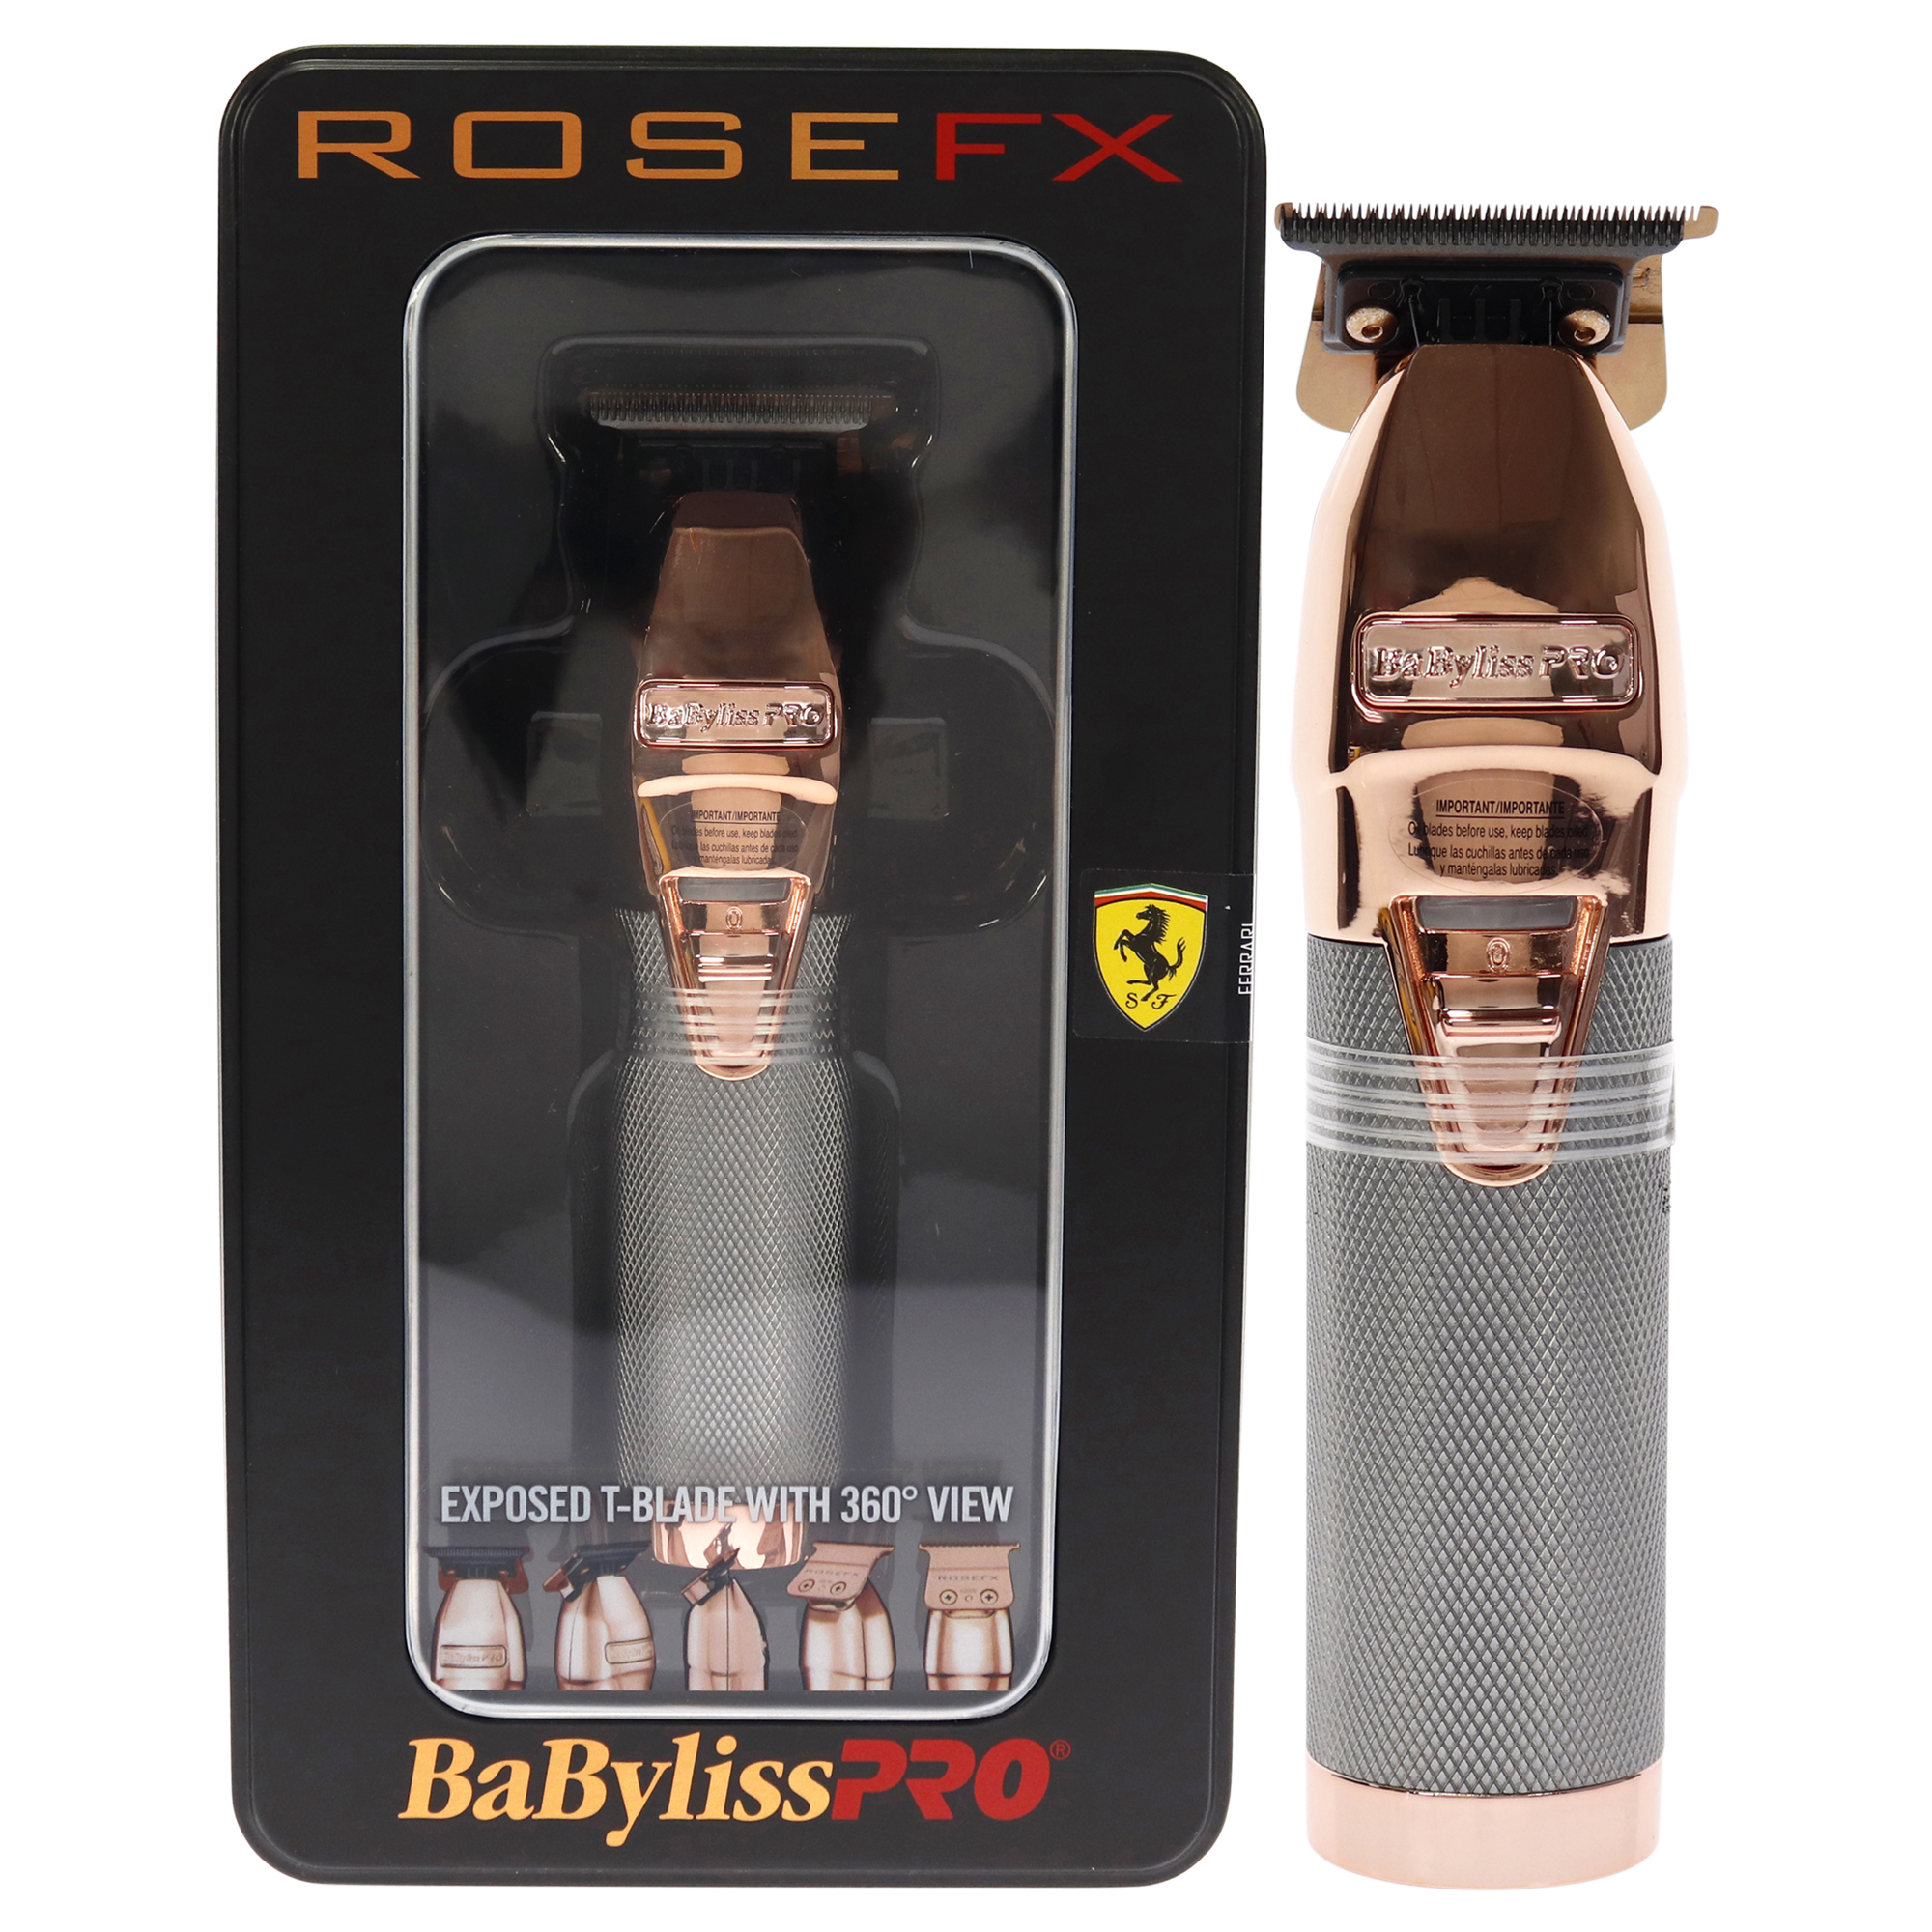 BaBylissPRO RoseFX Cord/Cordless Lithium Outlining Trimmer - image 3 of 3